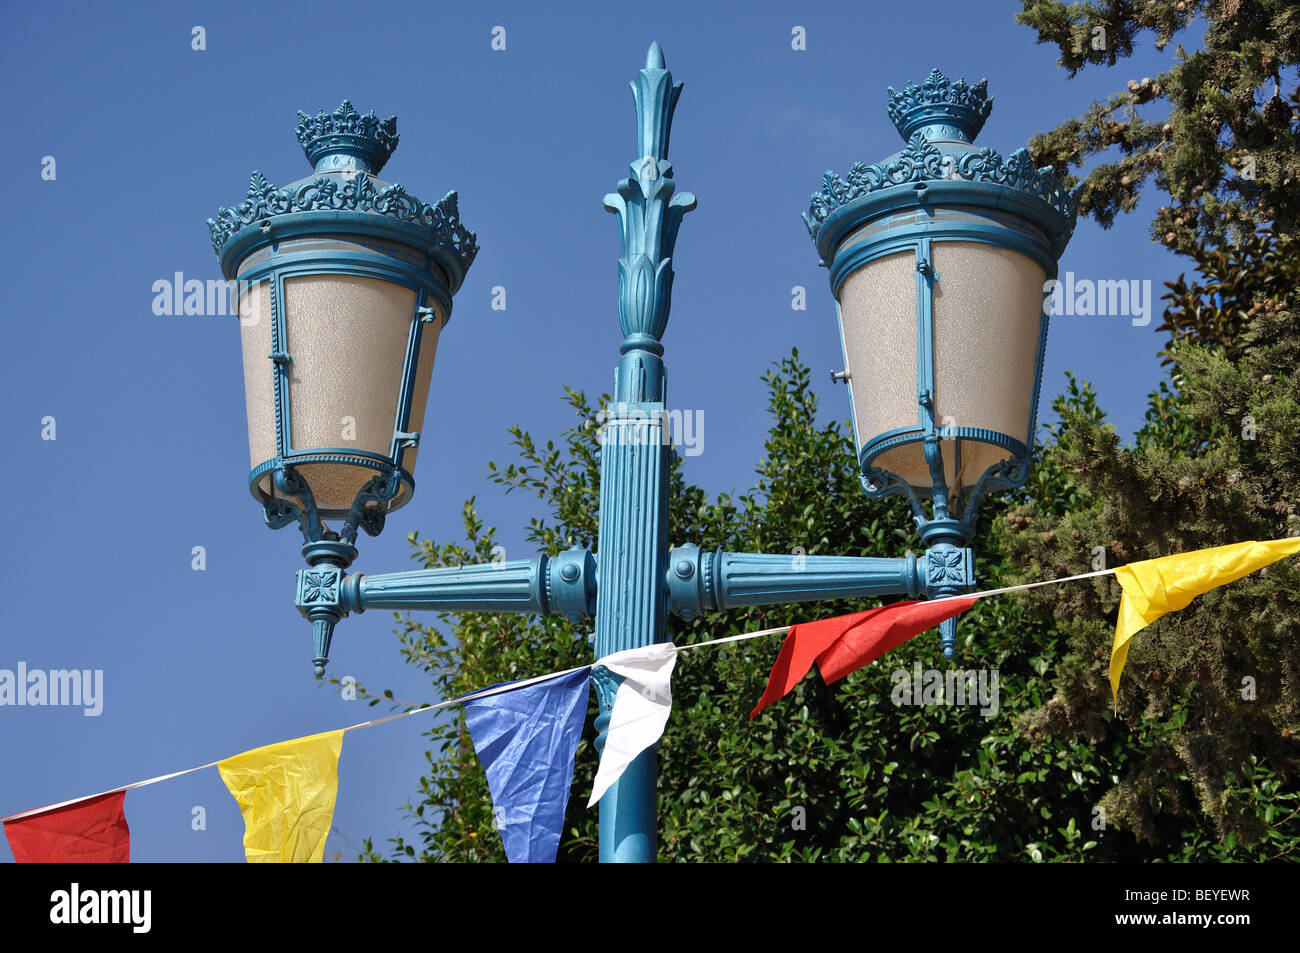 Ornate street lamps, Town centre, Ayia Napa, Famagusta District, Cyprus Stock Photo